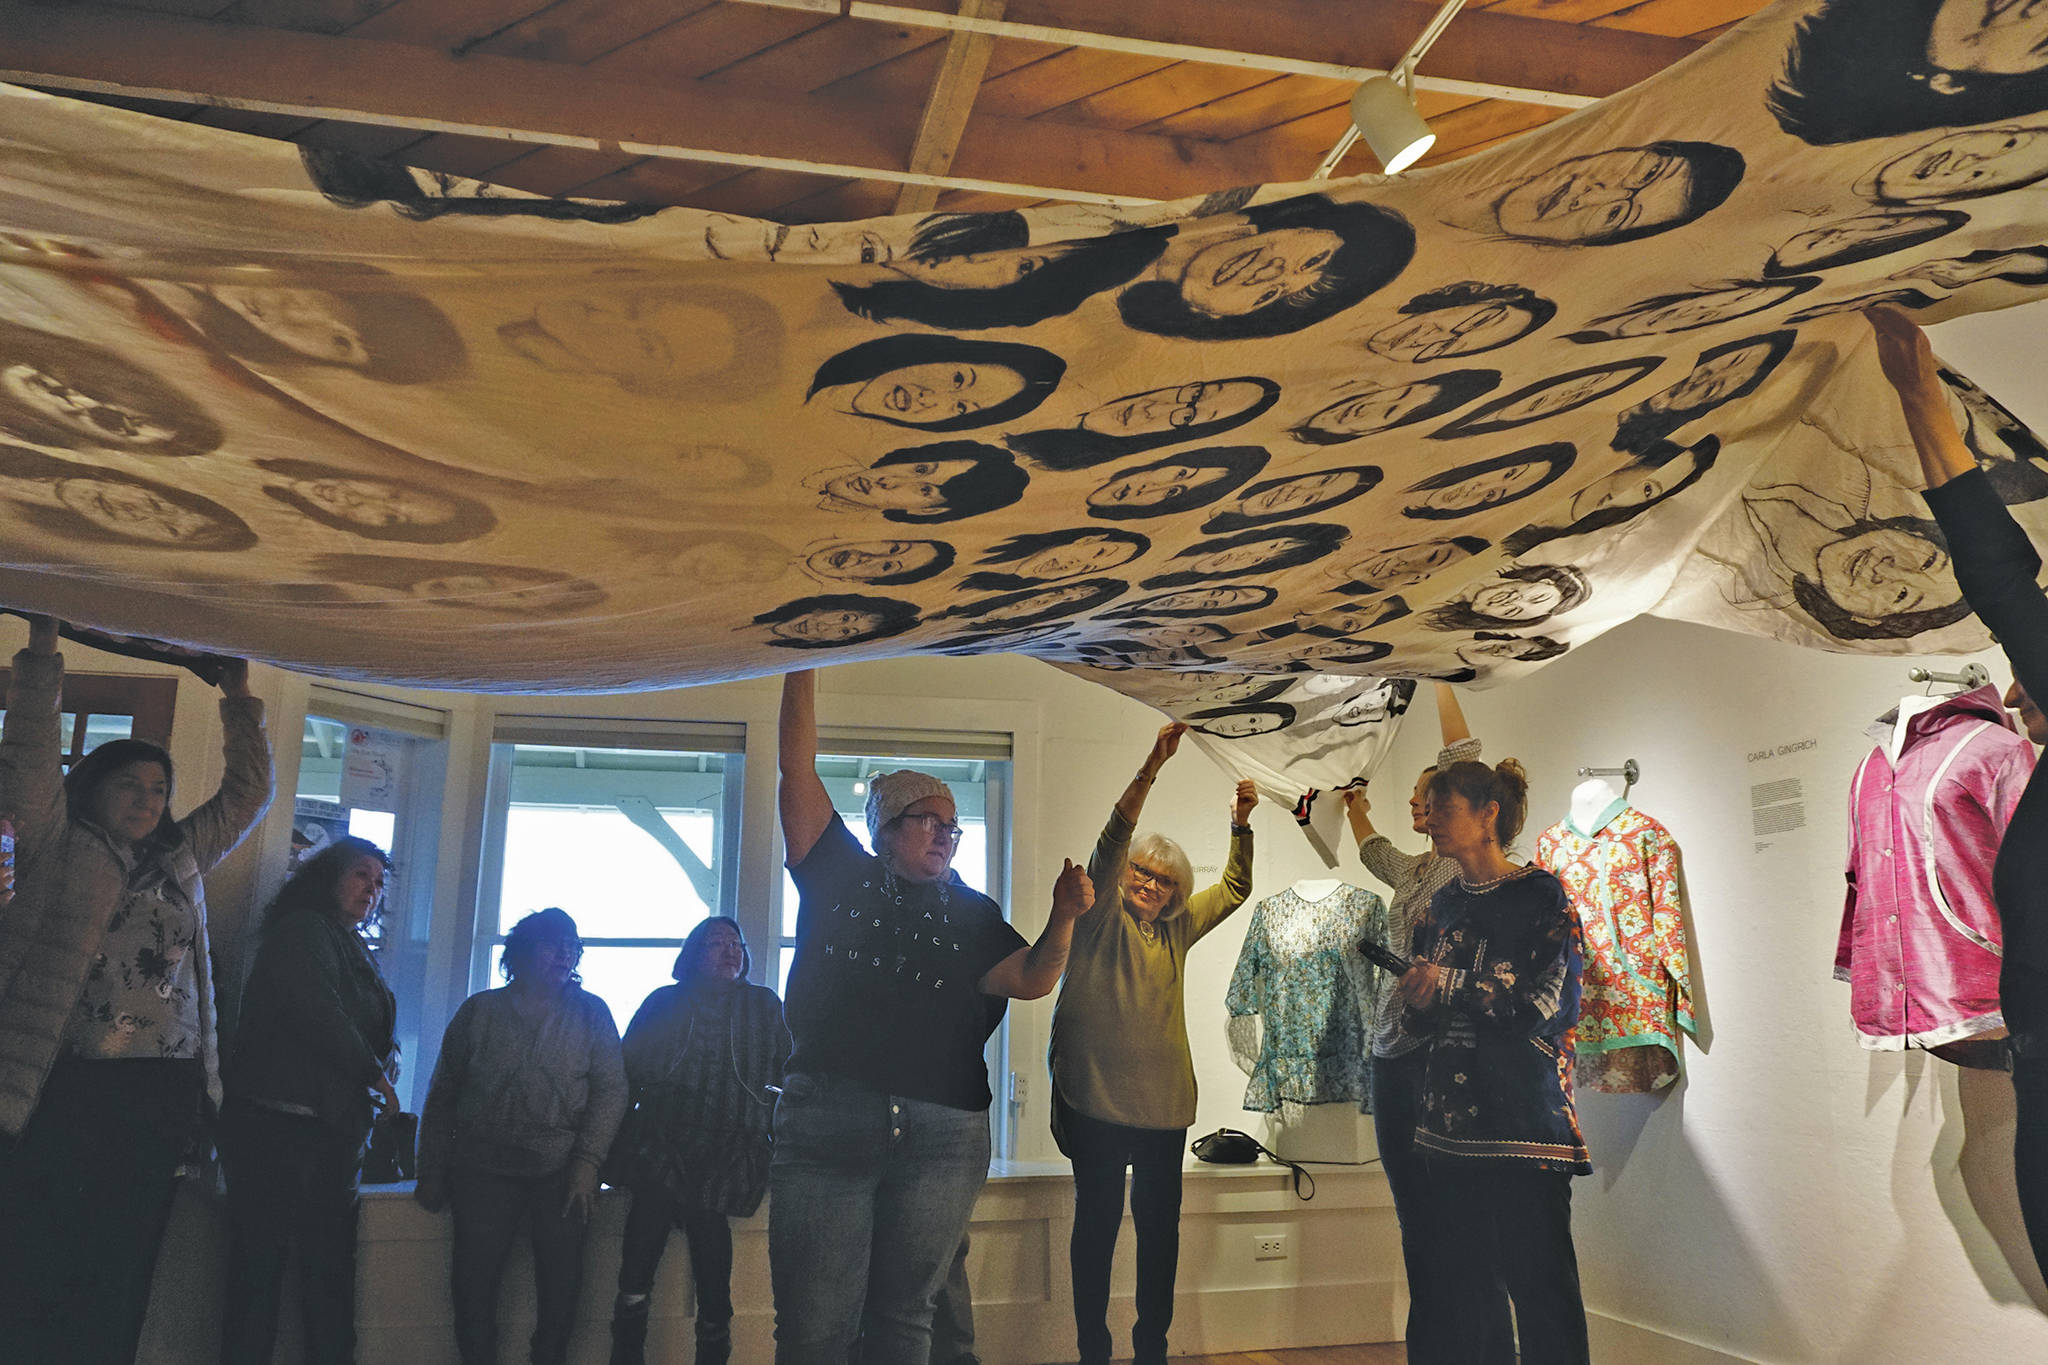 First Friday visitors hold up Amber Webb’s kuspuk at the opening of the “Kuspuk/Qaspeq/Atikluk” show on Oct. 5, 2019, at Bunnell Street Arts Center in Homer, Alaska. The kuspuk shows faces of missing or murdered indigenous women. (Photo by Michael Armstrong/Homer News)